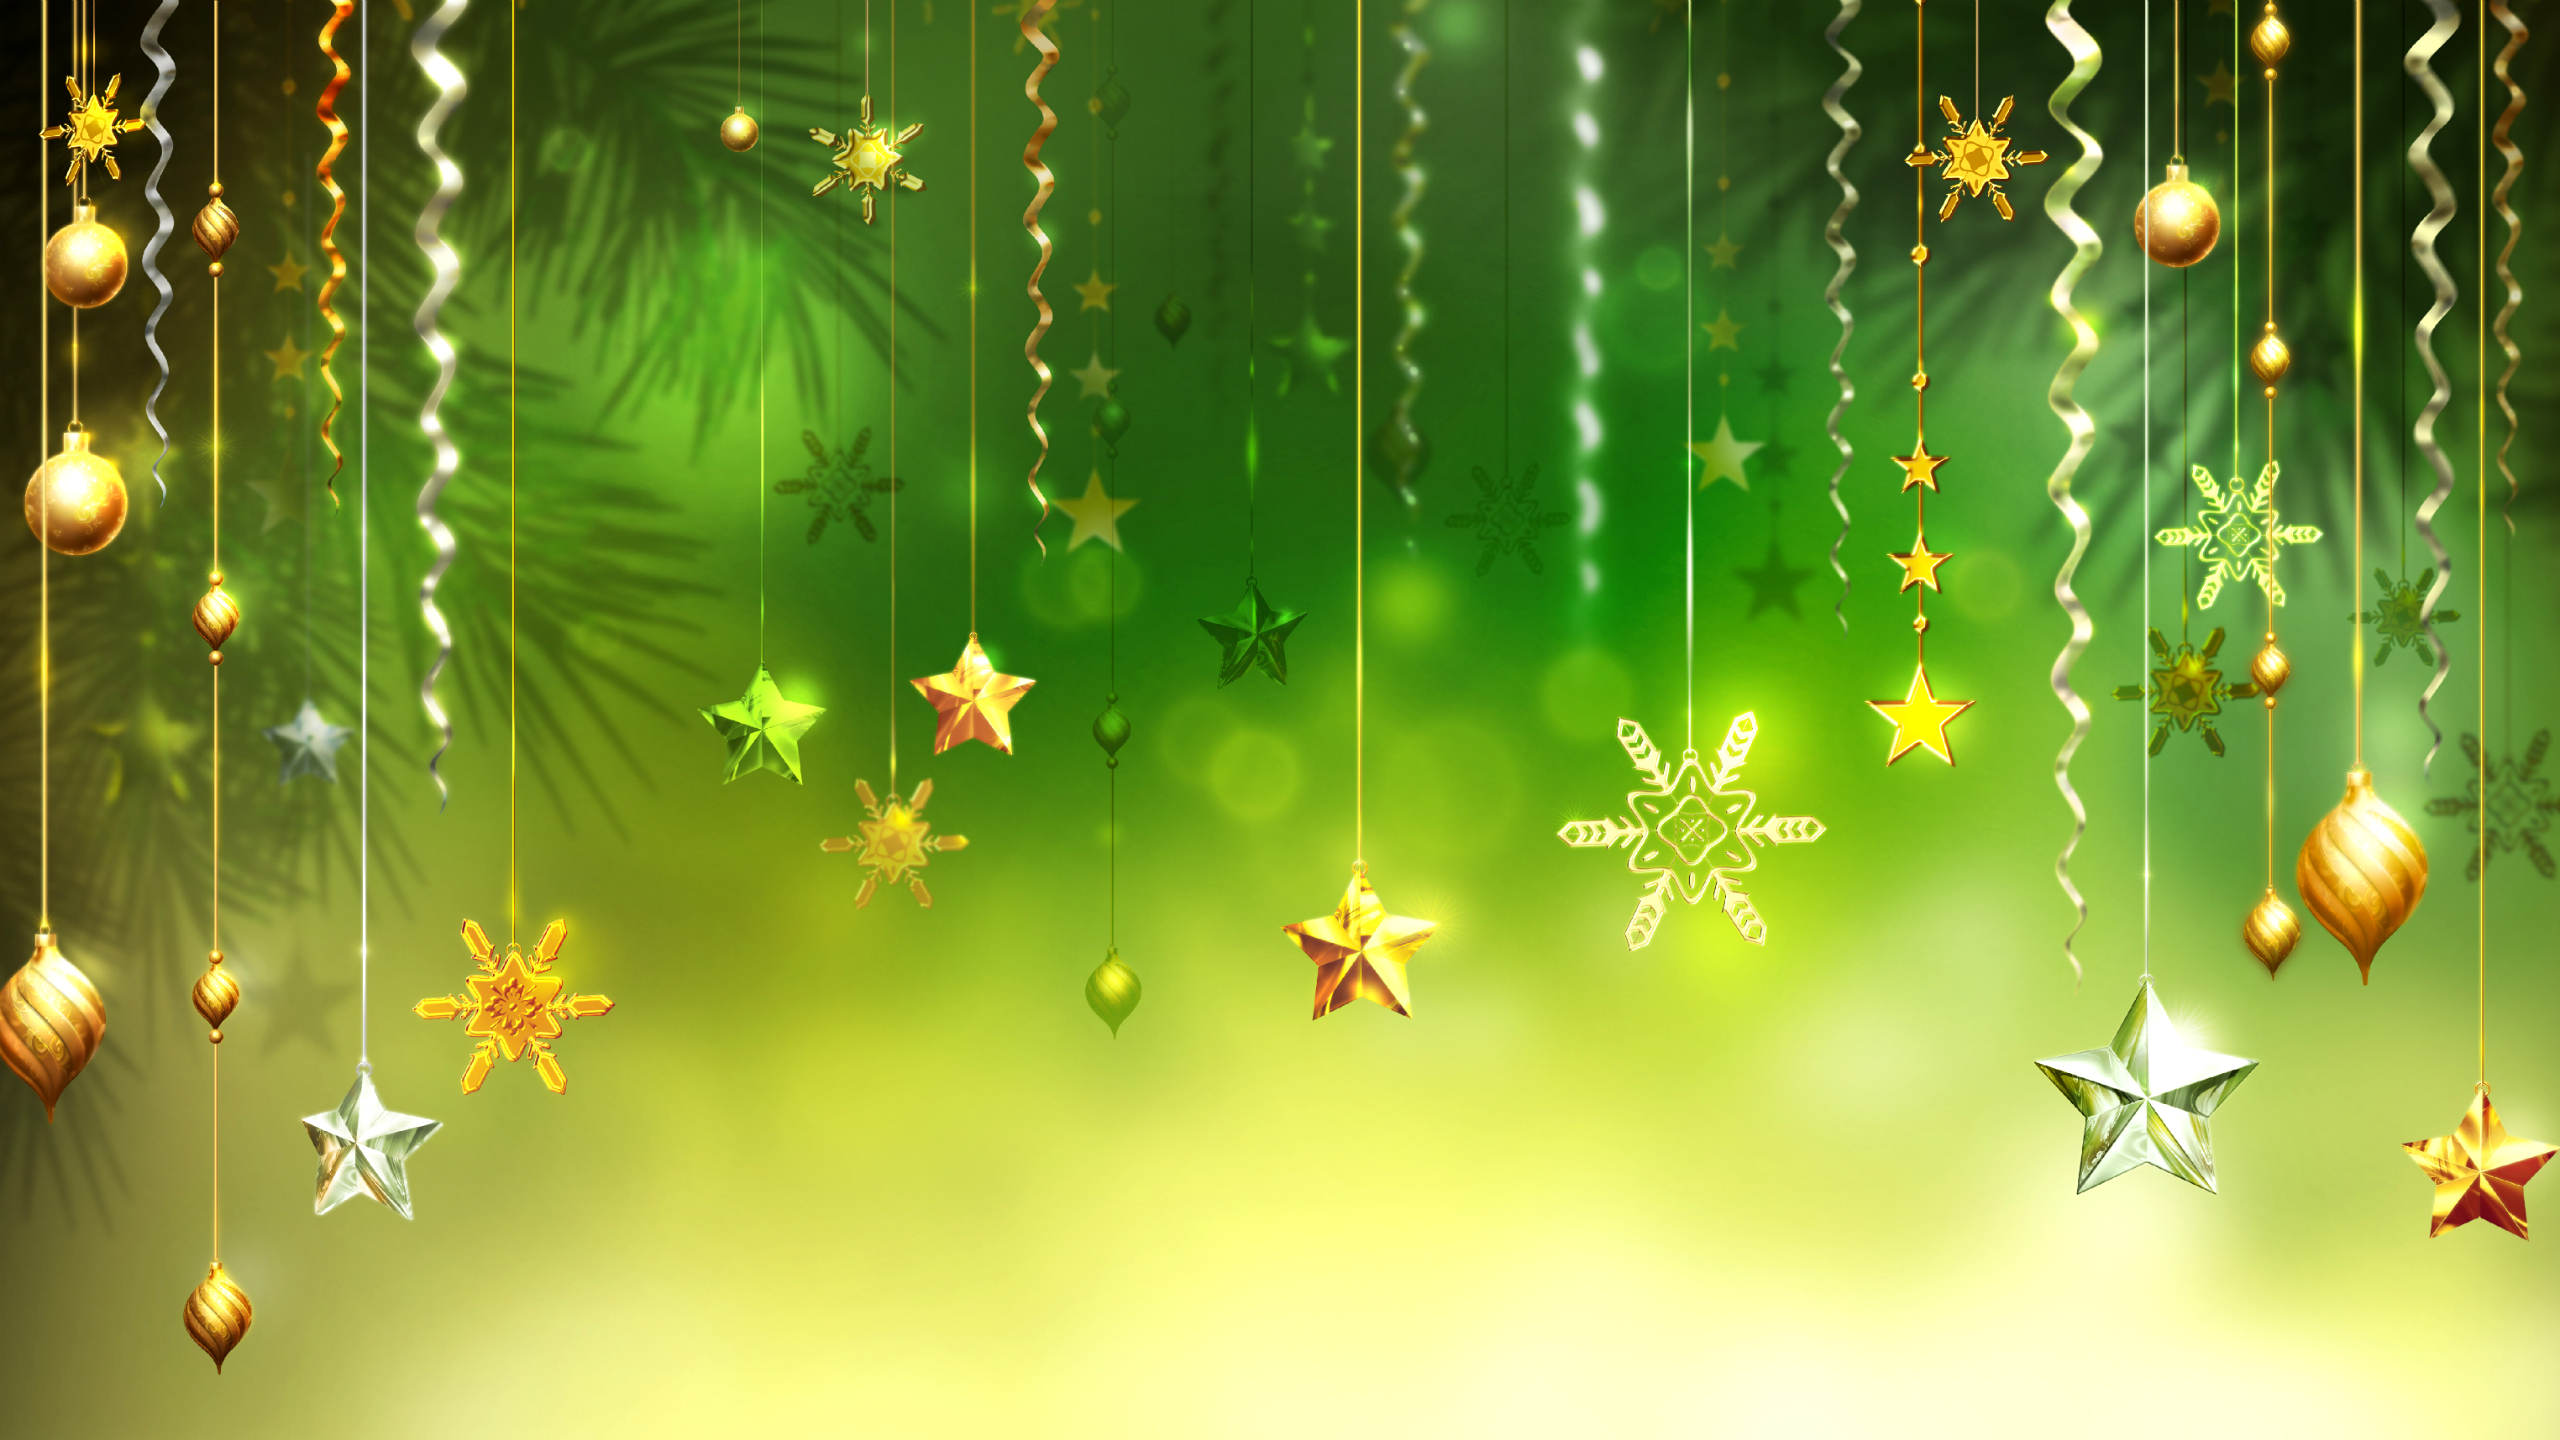 Christmas green Background Stars snowflakes decorative ornaments pictures Wallpapers For Desktop Laptop and Tablet 2560x1440